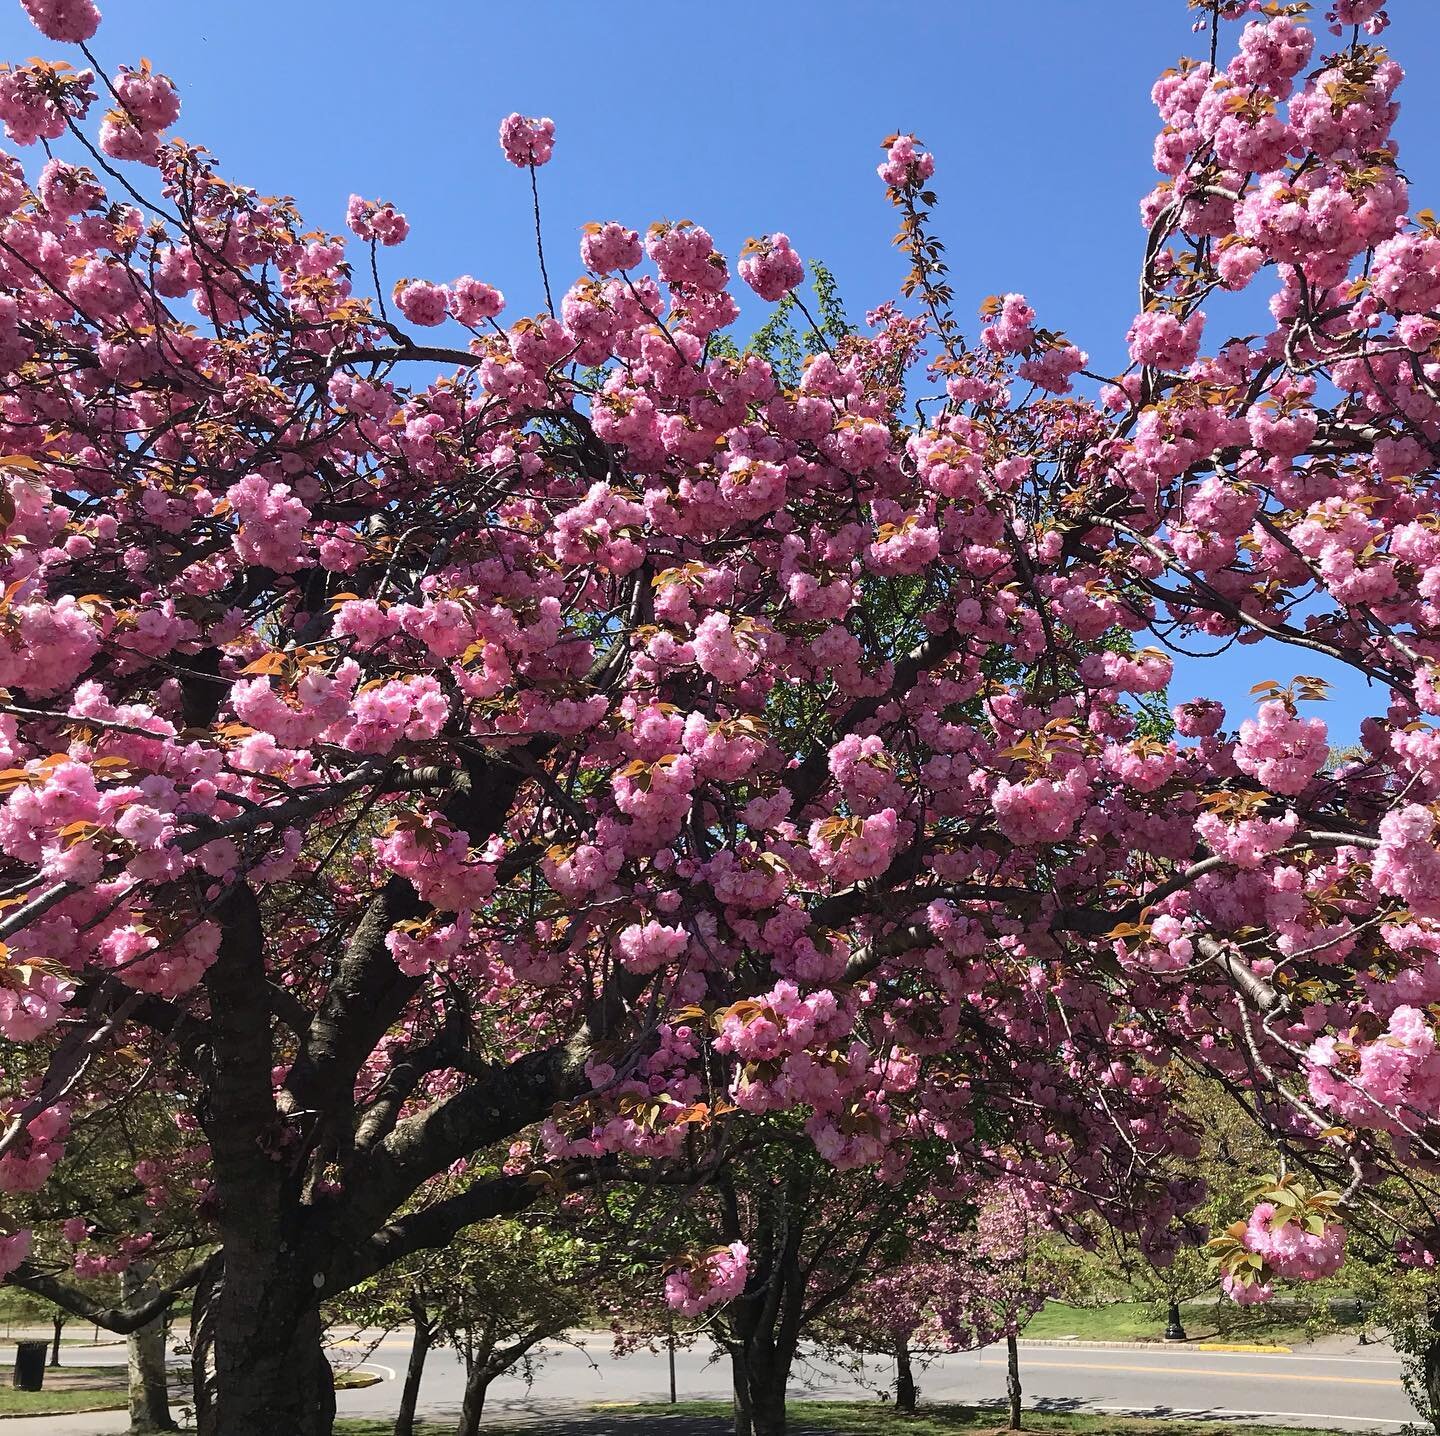 The final phase of the cherry blossom season or Sakura is around us with the late-blooming Kwanzans in full bloom with their deep pink double-blossoms. In another week or so the blossoms would be gone. 
It&rsquo;s this fleeting and transient beauty o